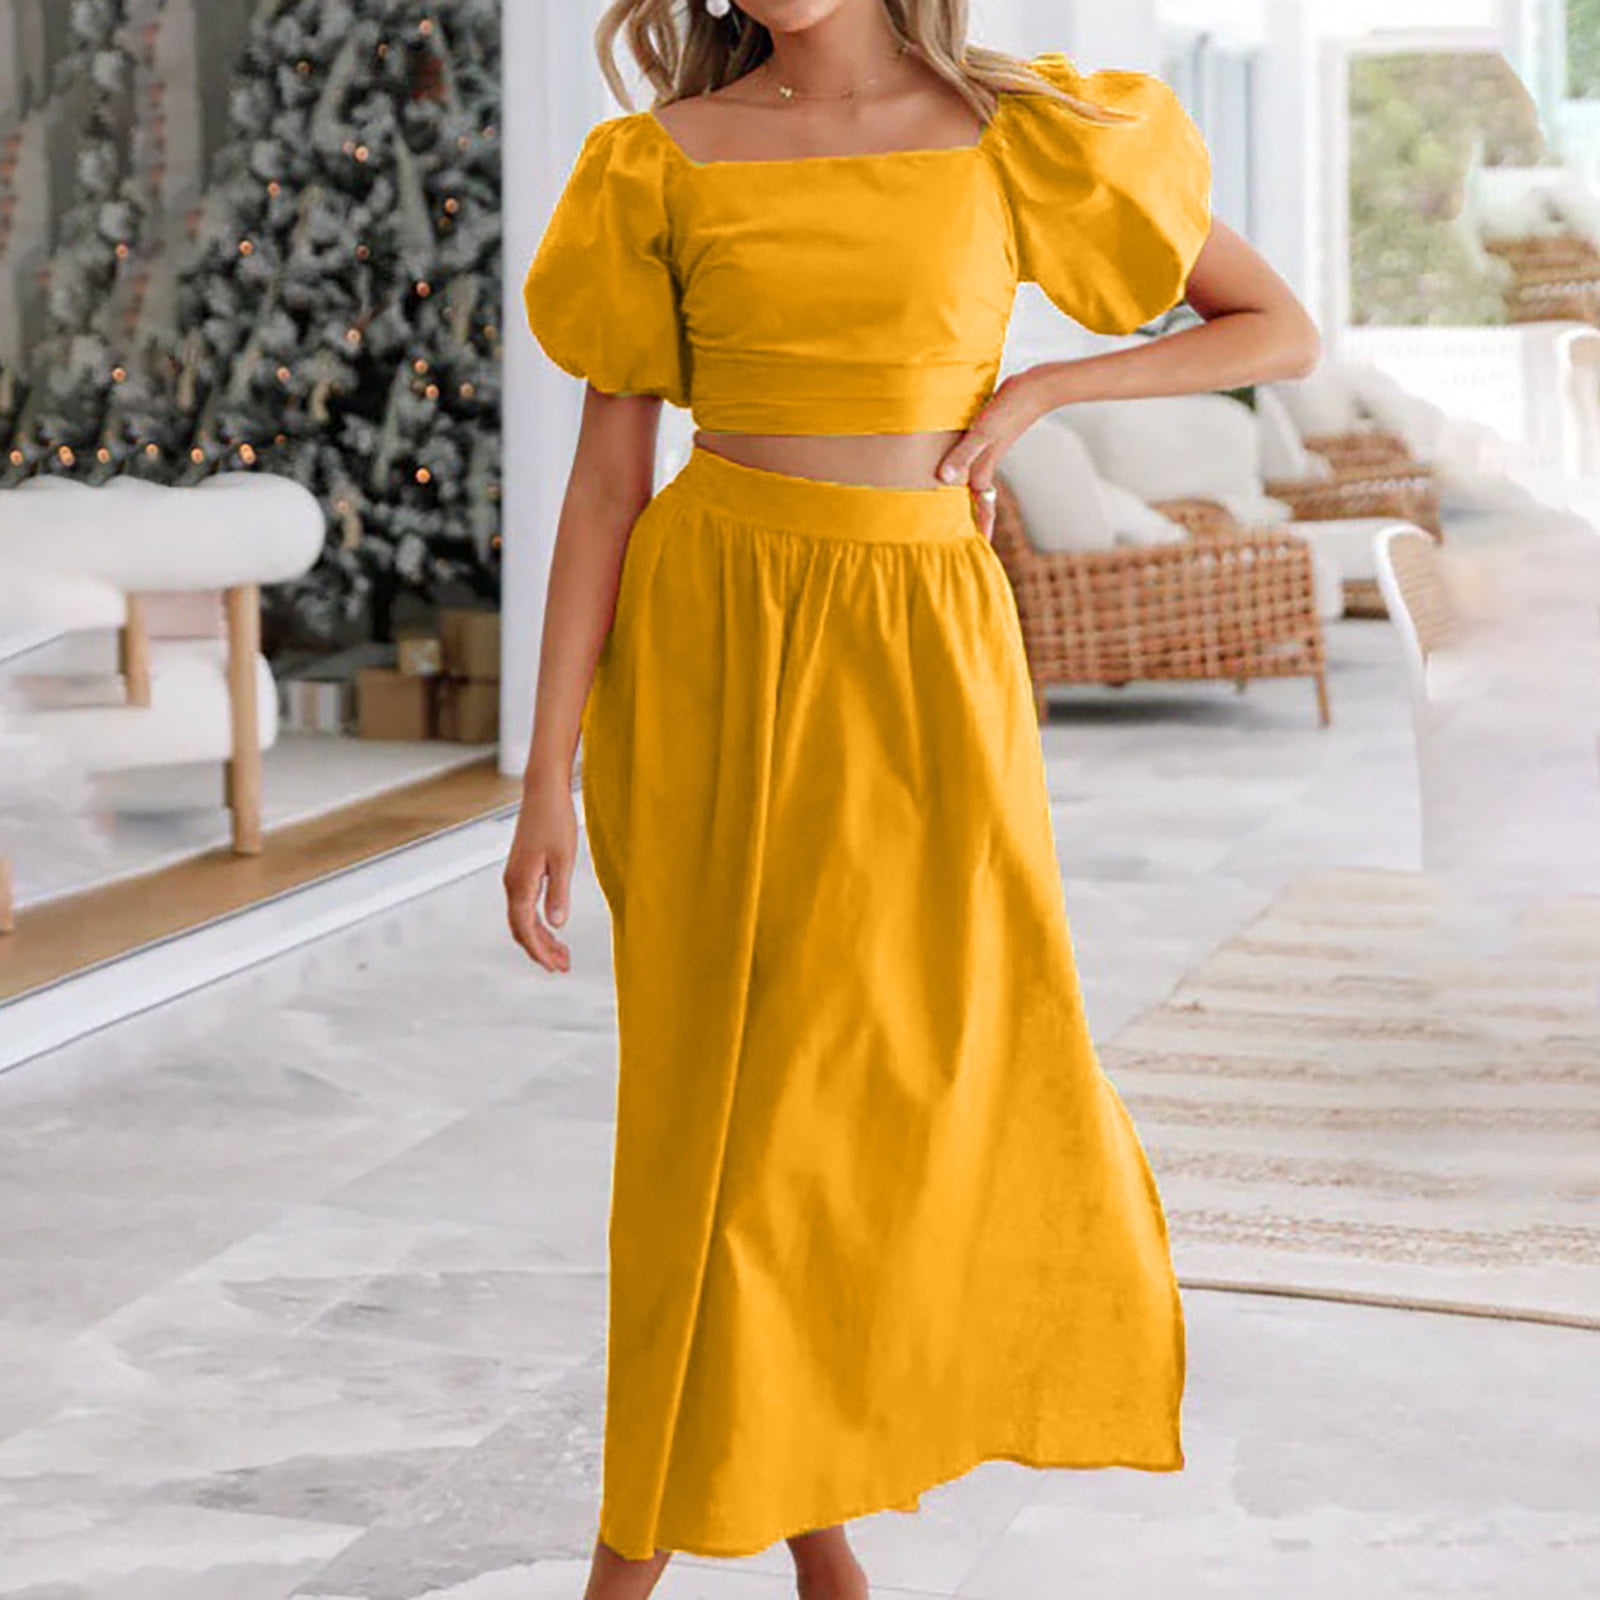 Finelylove Sundresse For Woman Dresses That Hide Belly Fat V-Neck Printed  Short Sleeve Mini Yellow 